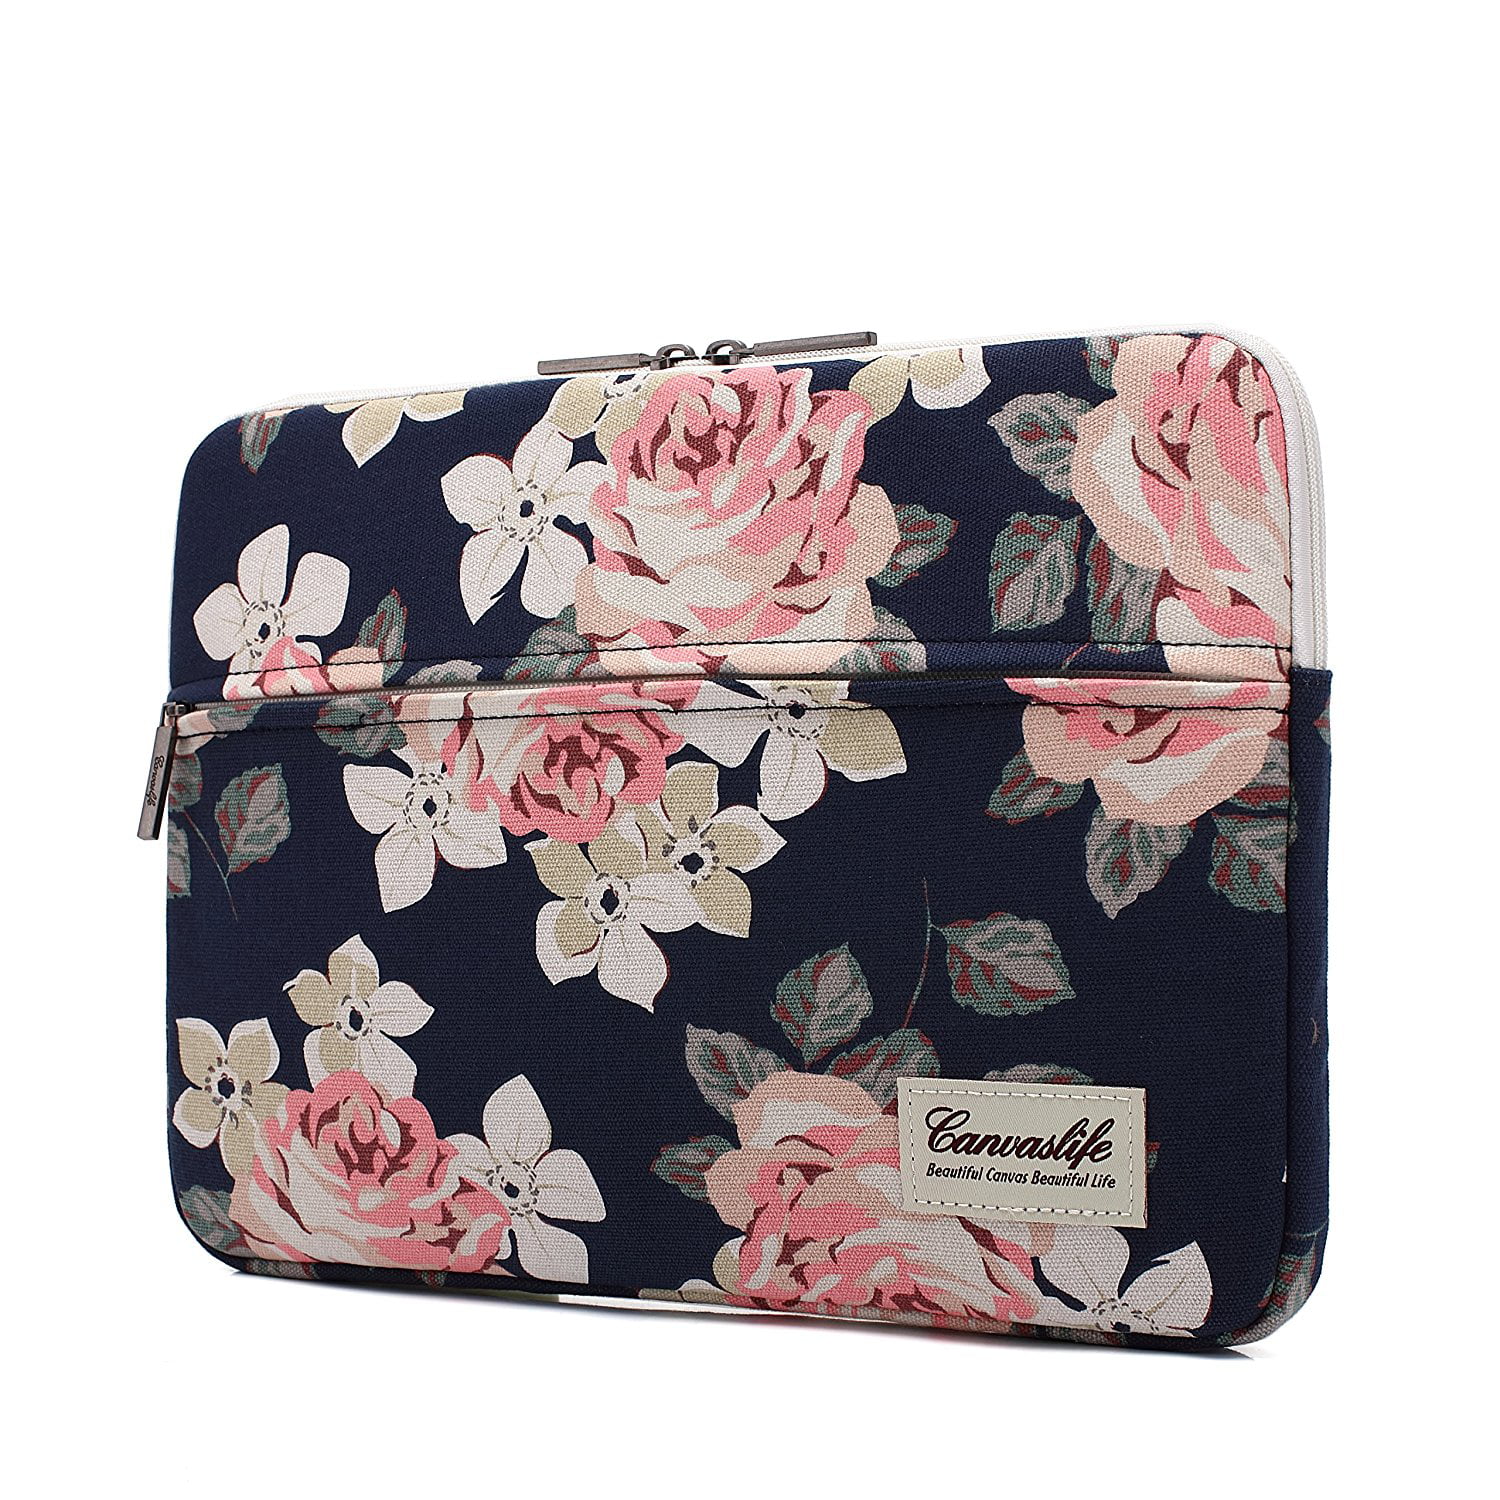 Canvaslife White Rose Pattern 13 inch Canvas laptop sleeve with pocket 13 inch 13.3 inch laptop ...